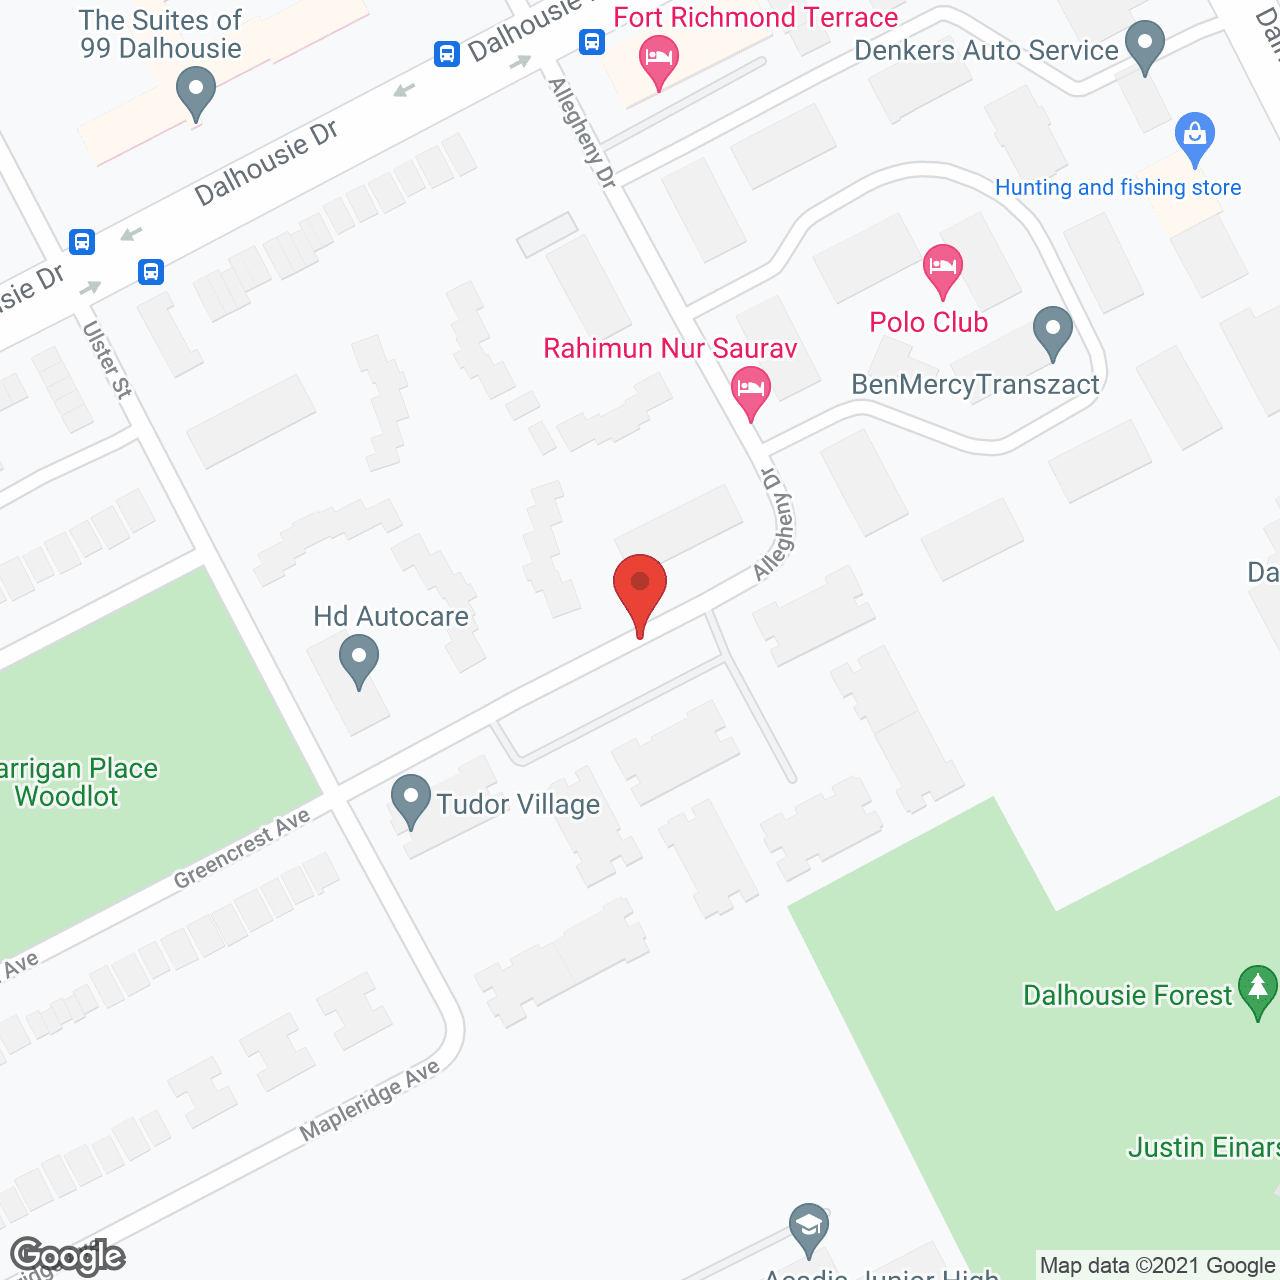 The Polo Club in google map